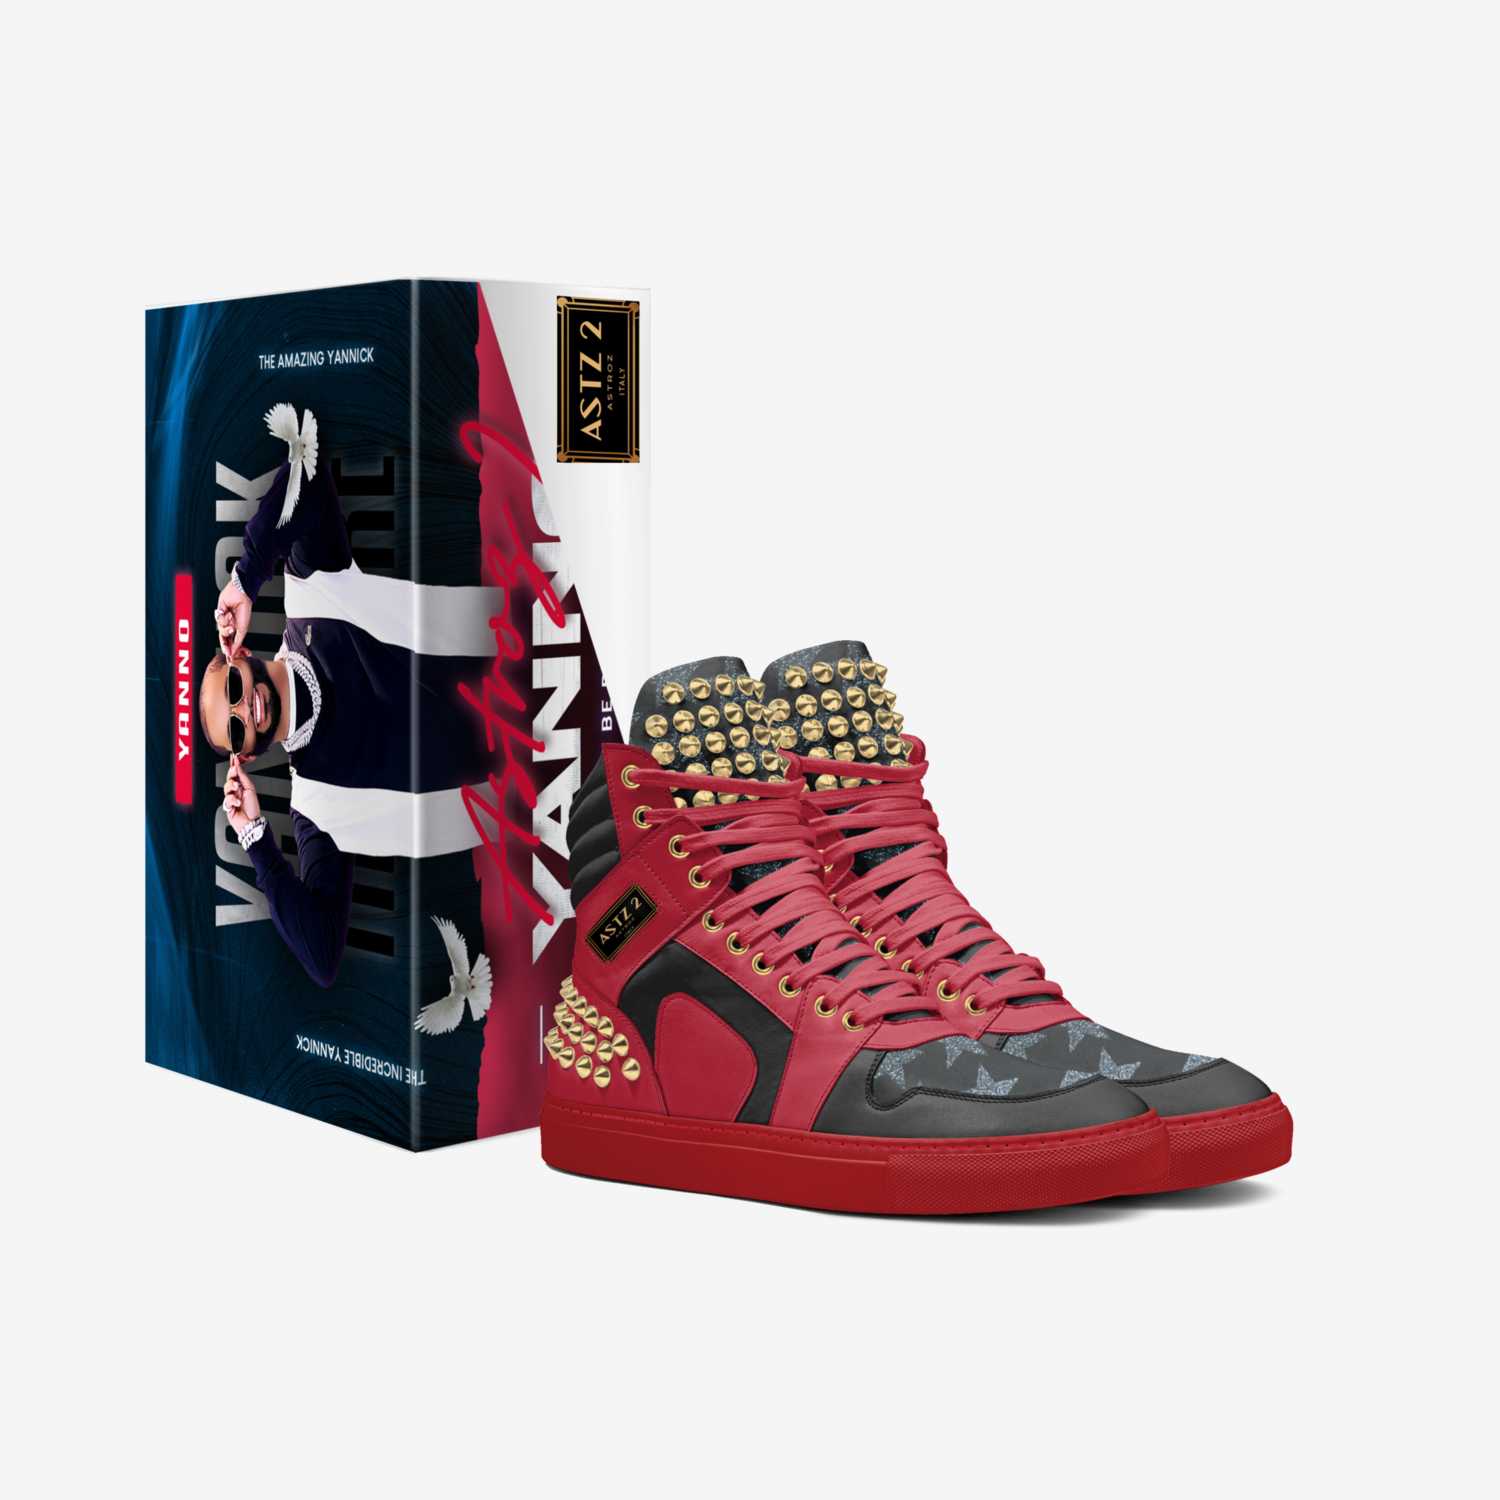 THE ASTROZ 2 MO custom made in Italy shoes by Yannick Theodore | Box view